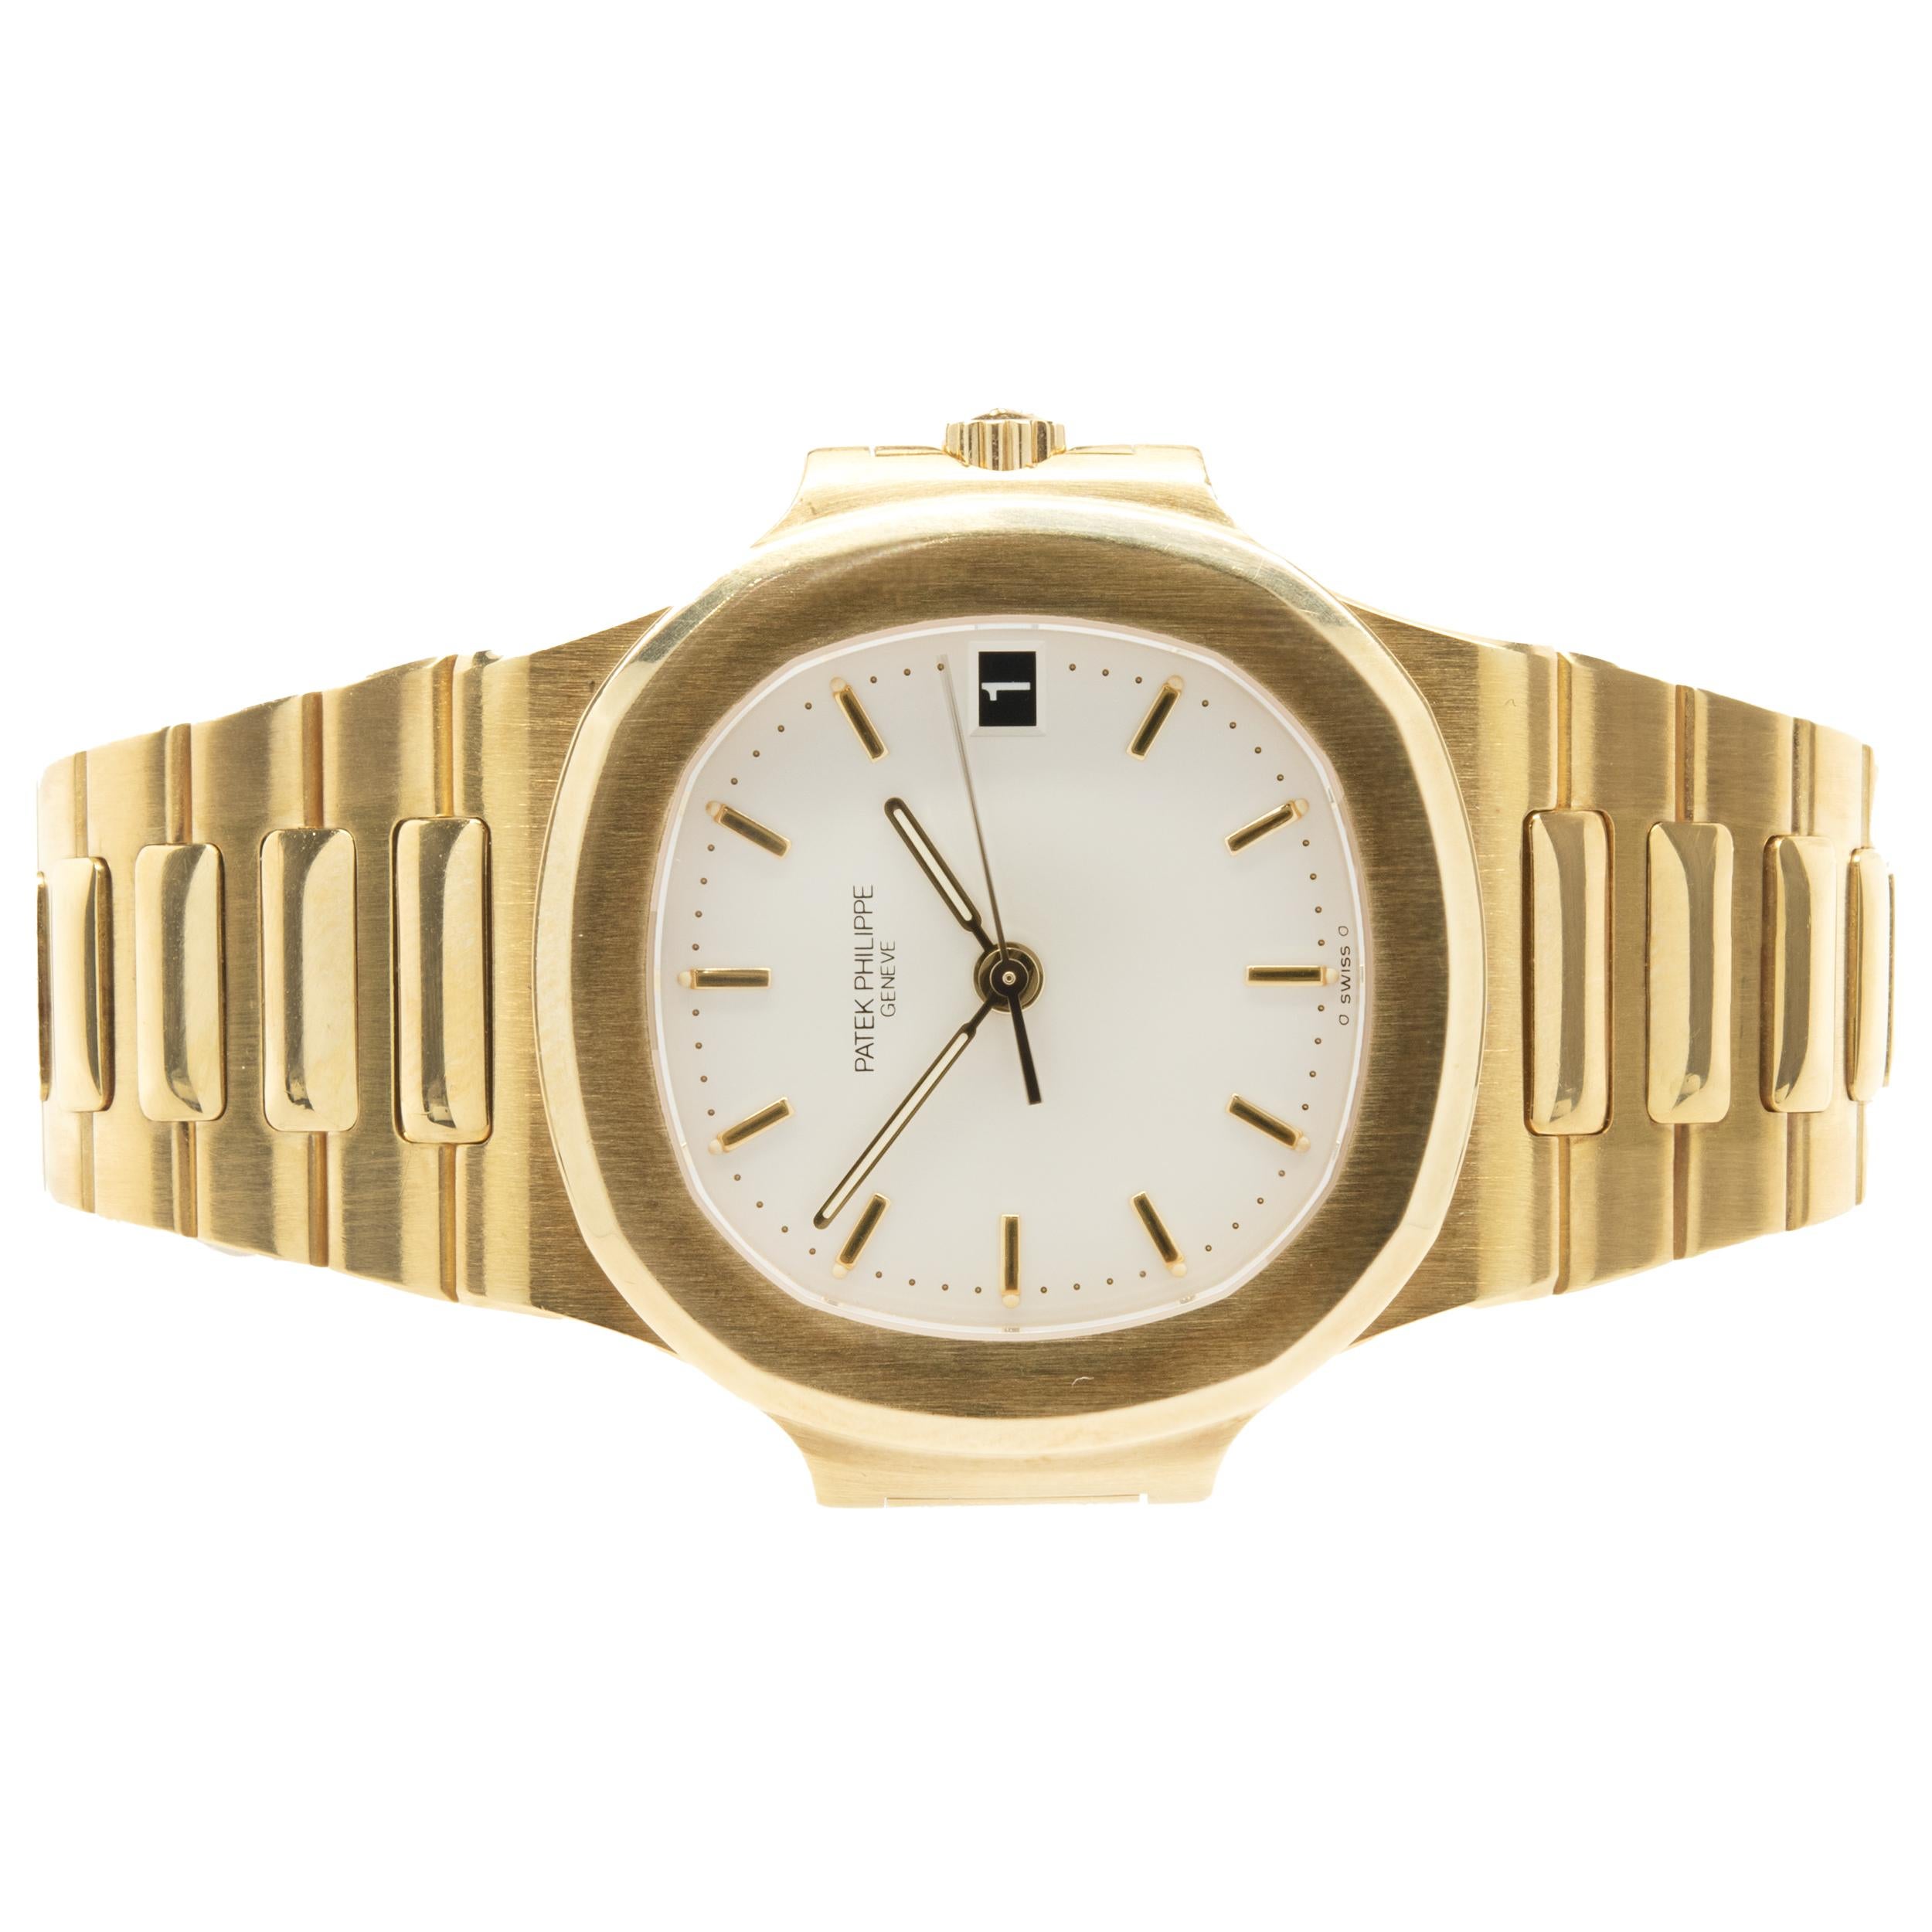 Movement: automatic
Function: hours, minutes, date
Case: 37mm 18K yellow gold round case, smooth bezel, sapphire crystal, push pull crown
Band: Patek Philippe 18K yellow gold bracelet, 18k yellow gold integrated clasp
Dial: Ivory stick
Reference: